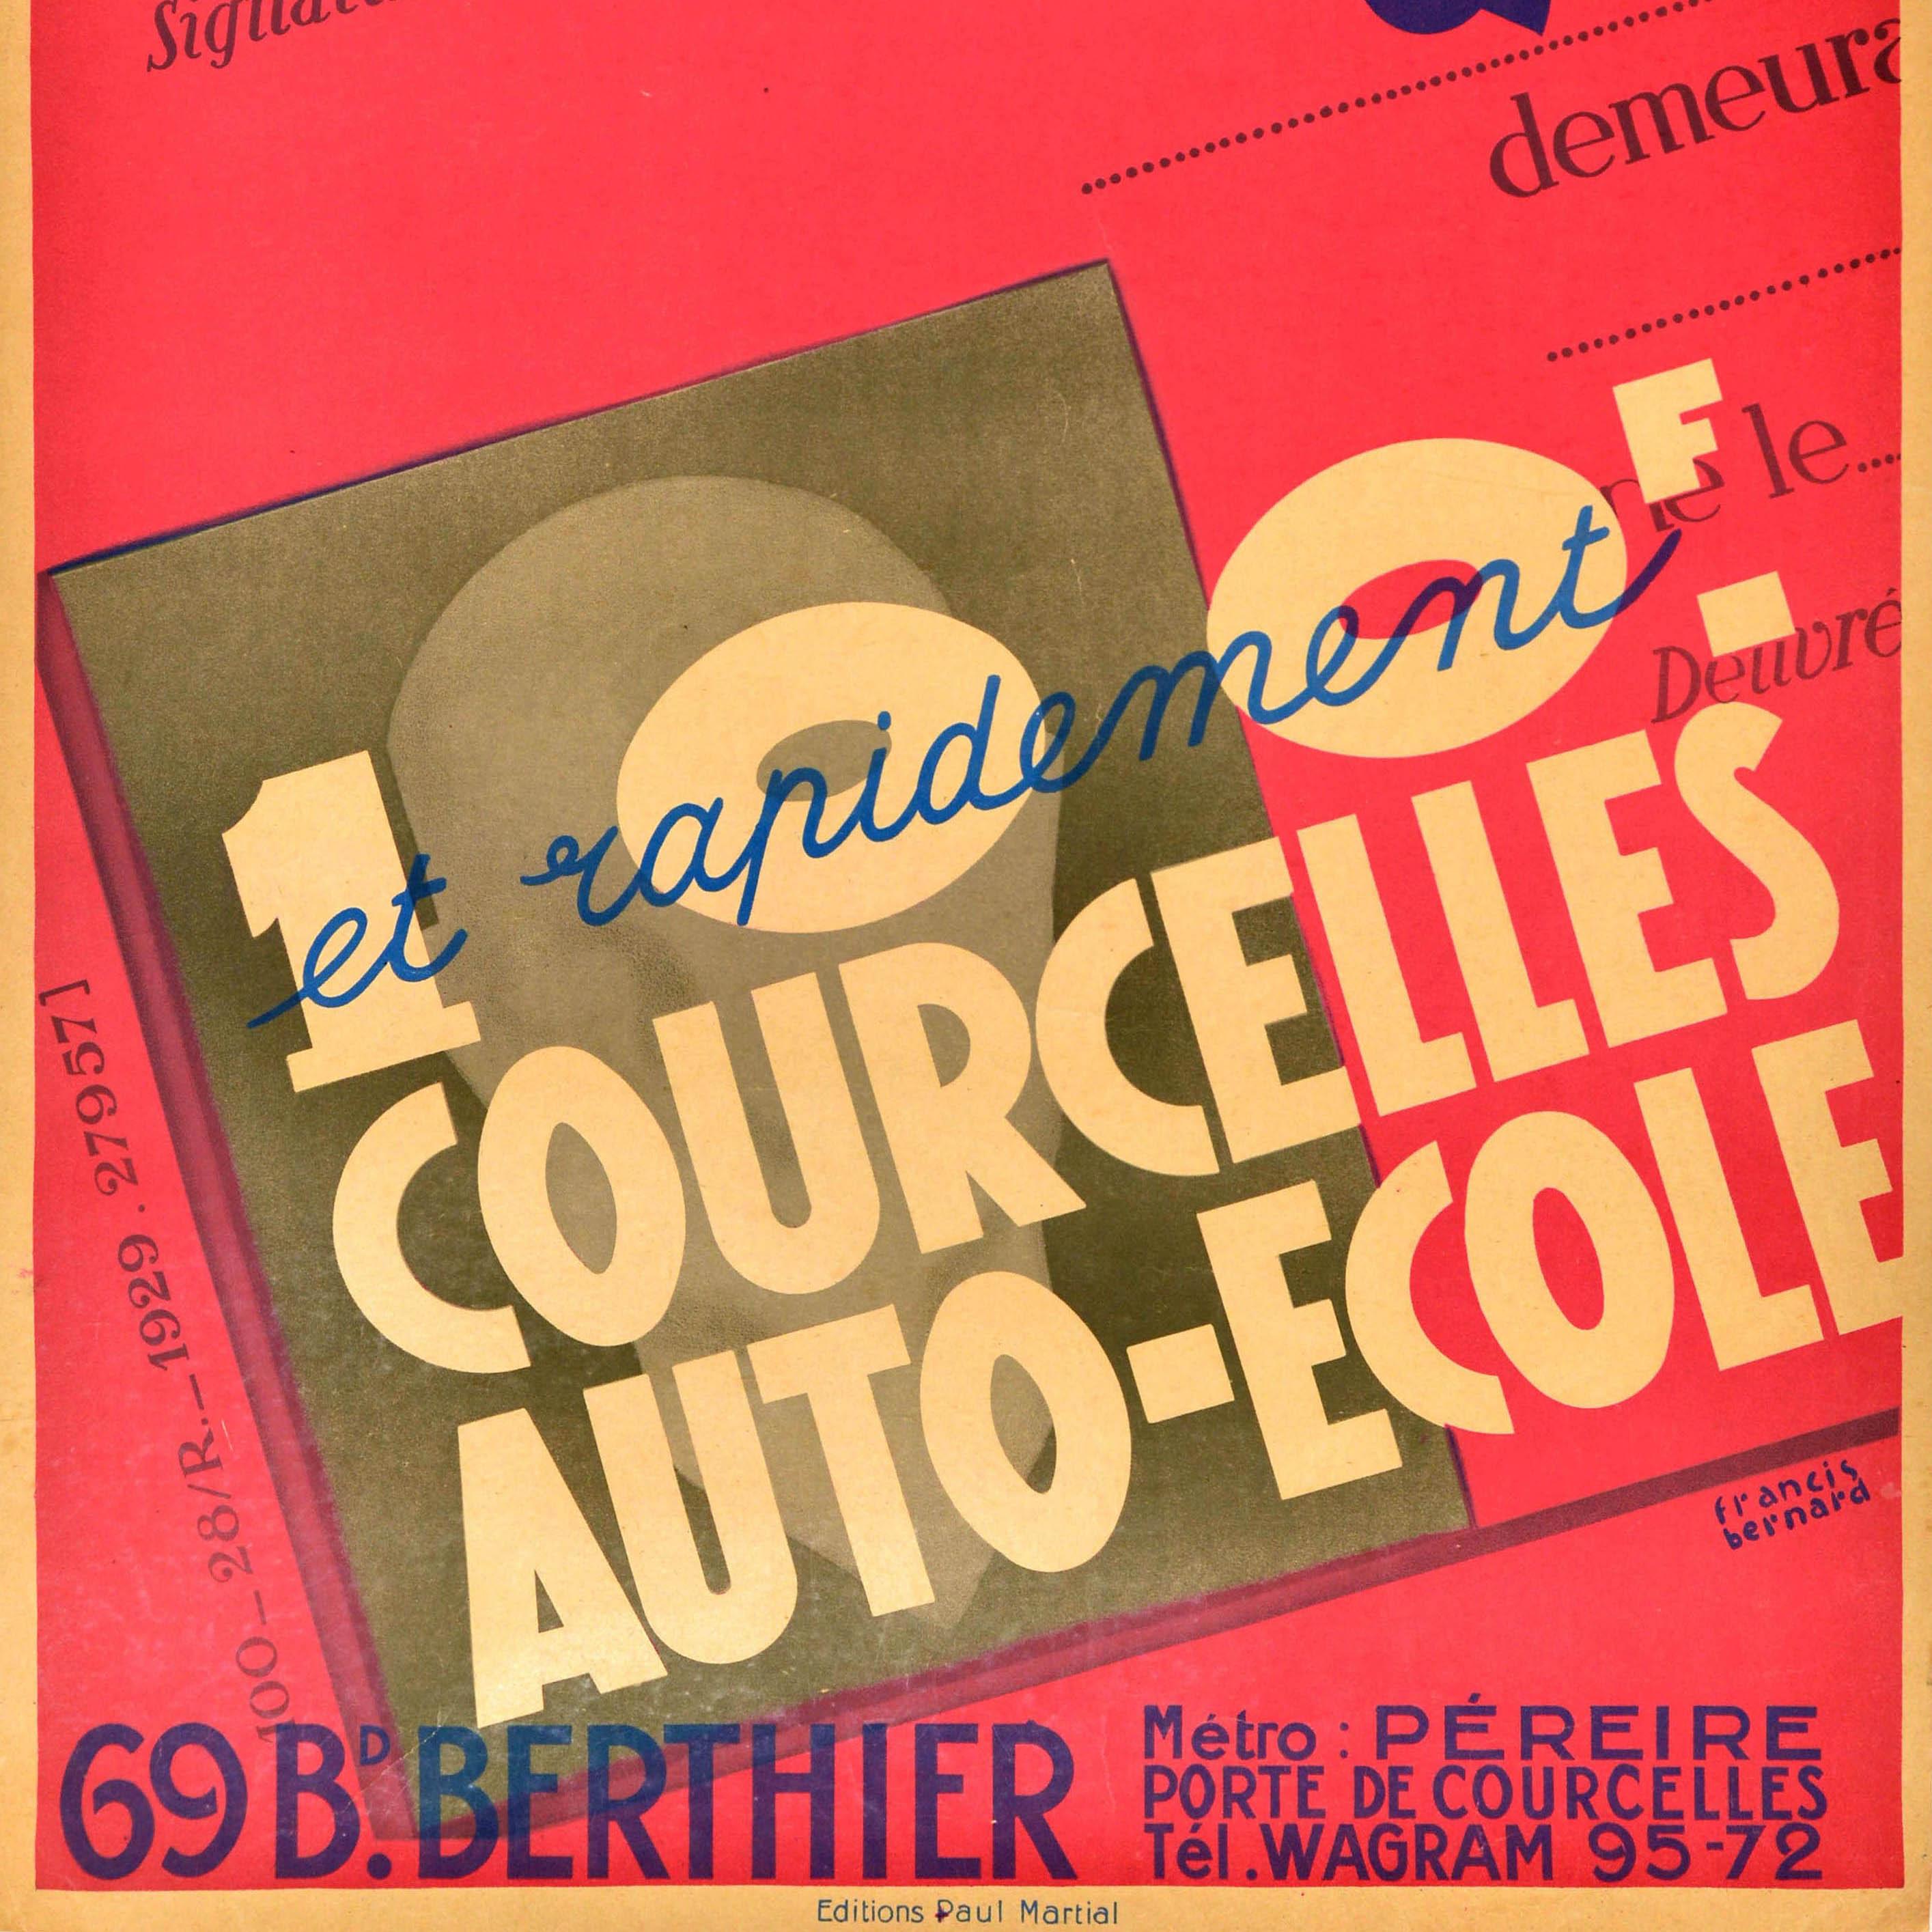 Original vintage advertising poster - Permis de Conduire 100F Courcelles Auto Ecole 69 Boulevard Berthier / Driving licence 100 Francs Courcelles Driving School - featuring an Art Deco design of a driver's license with a silhouette image of a driver